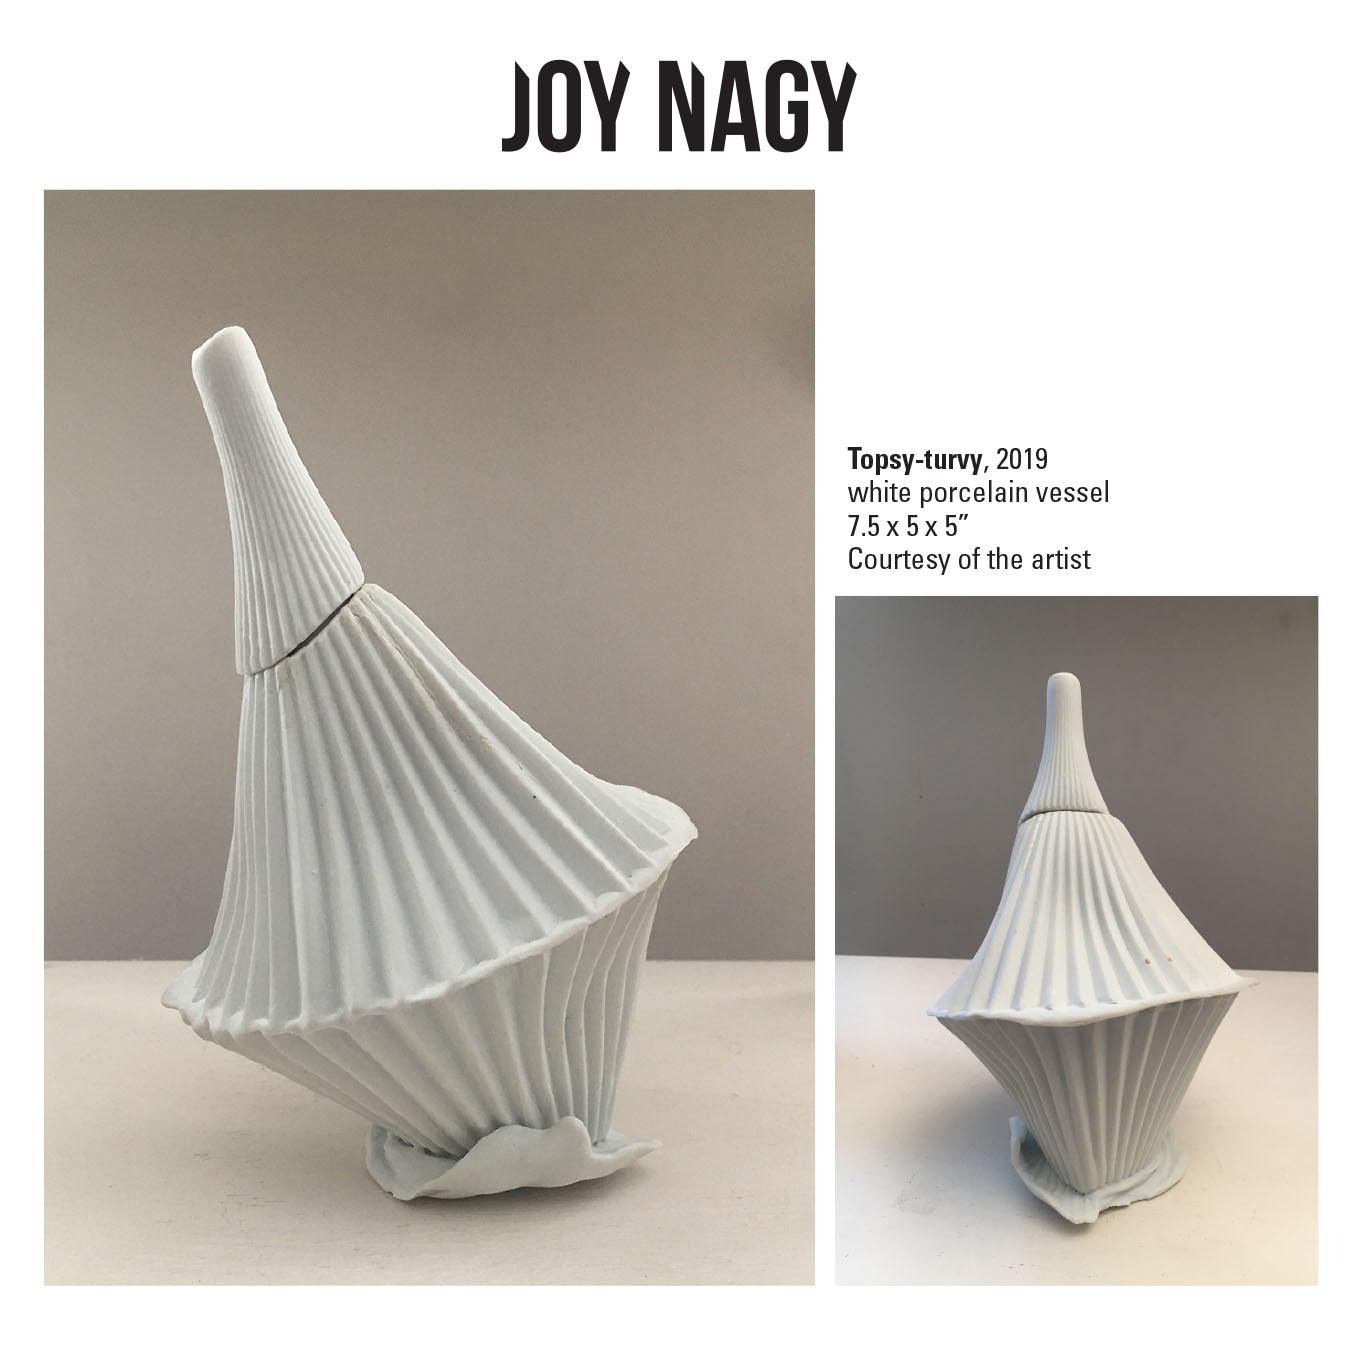 Joy Nagy, Topsy-turvy, 2019. White porcelain vessel. 7.5 x 5 x 5” Courtesy of the artist. A sculpture of a white vessel with vertical lines surround it on all sides